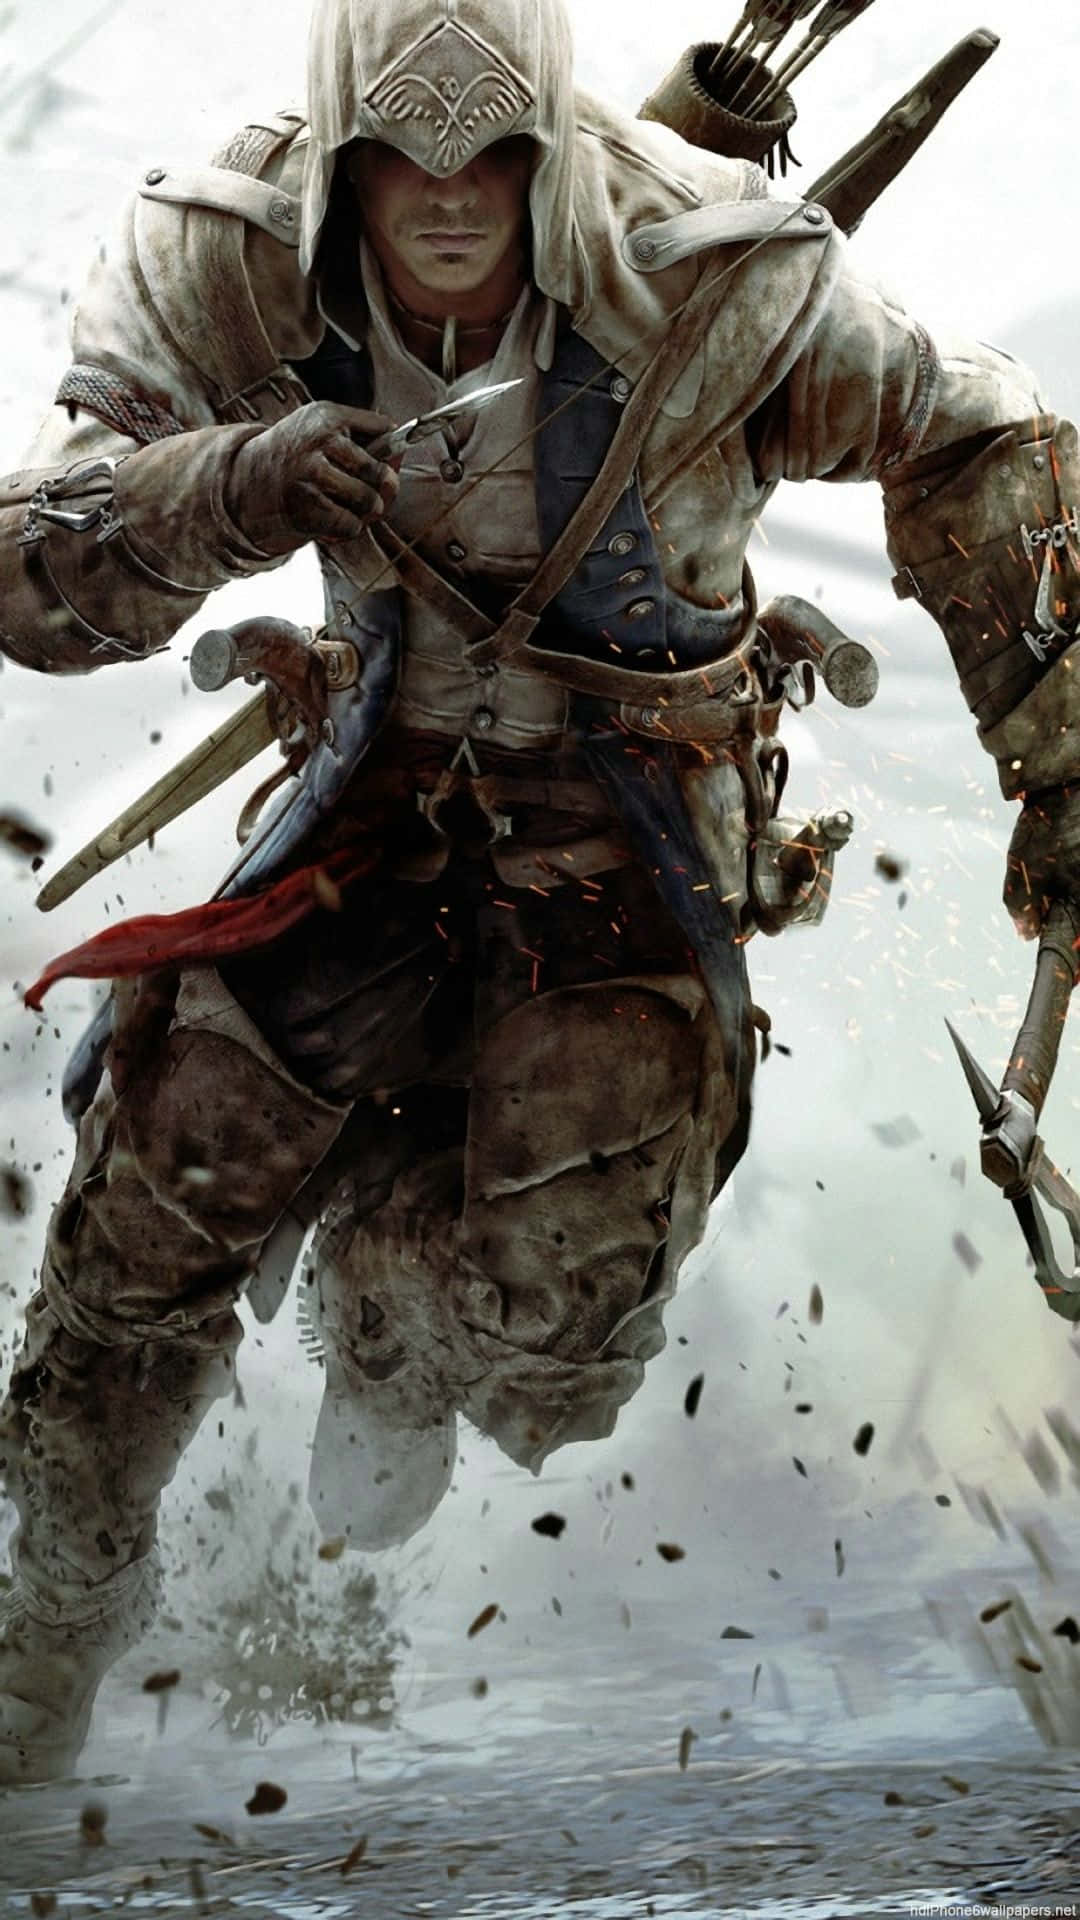 Get Ready To Explore The World With Assassins Creed On Your Iphone Background